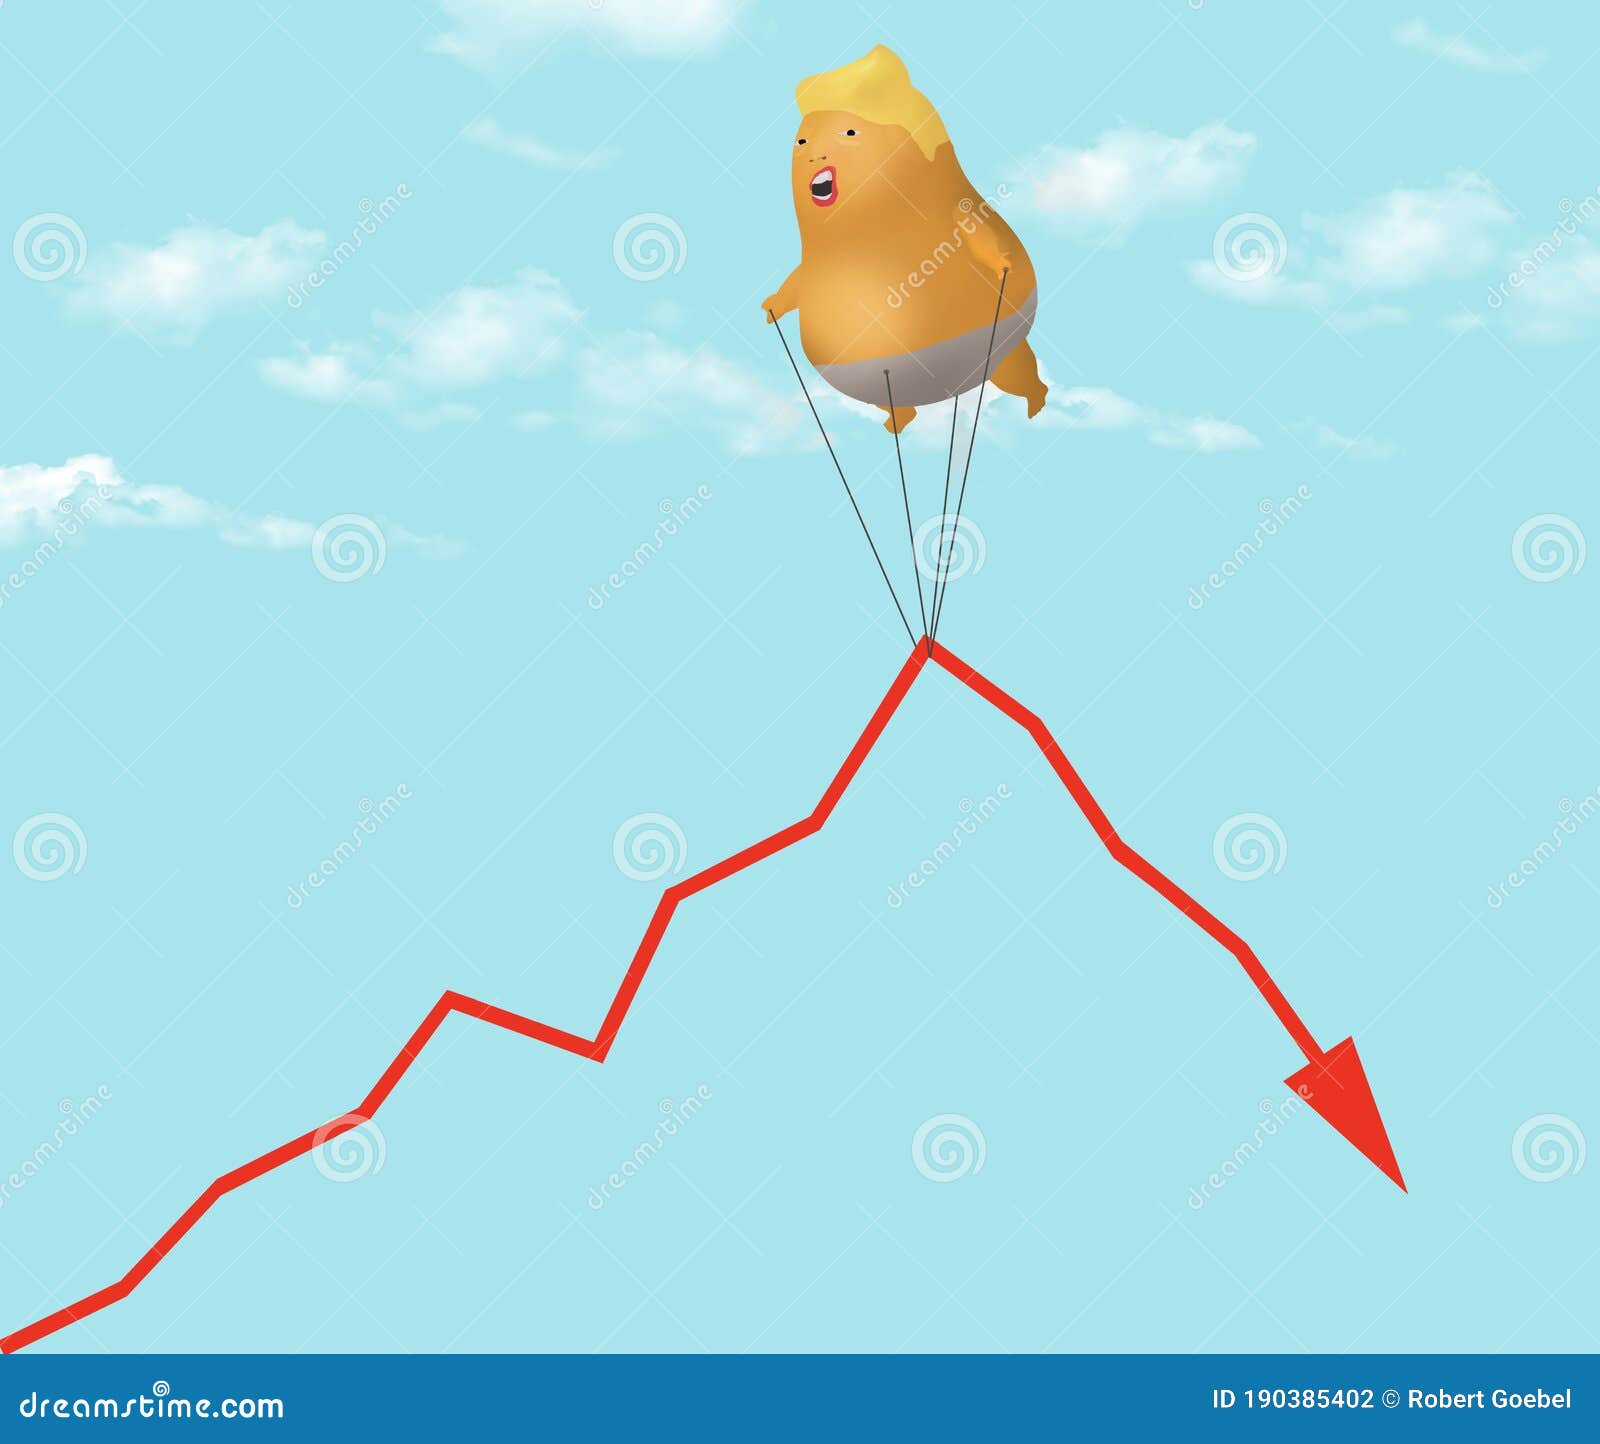 a blimp that looks like donald trump struggles to lift the graph of the stock market